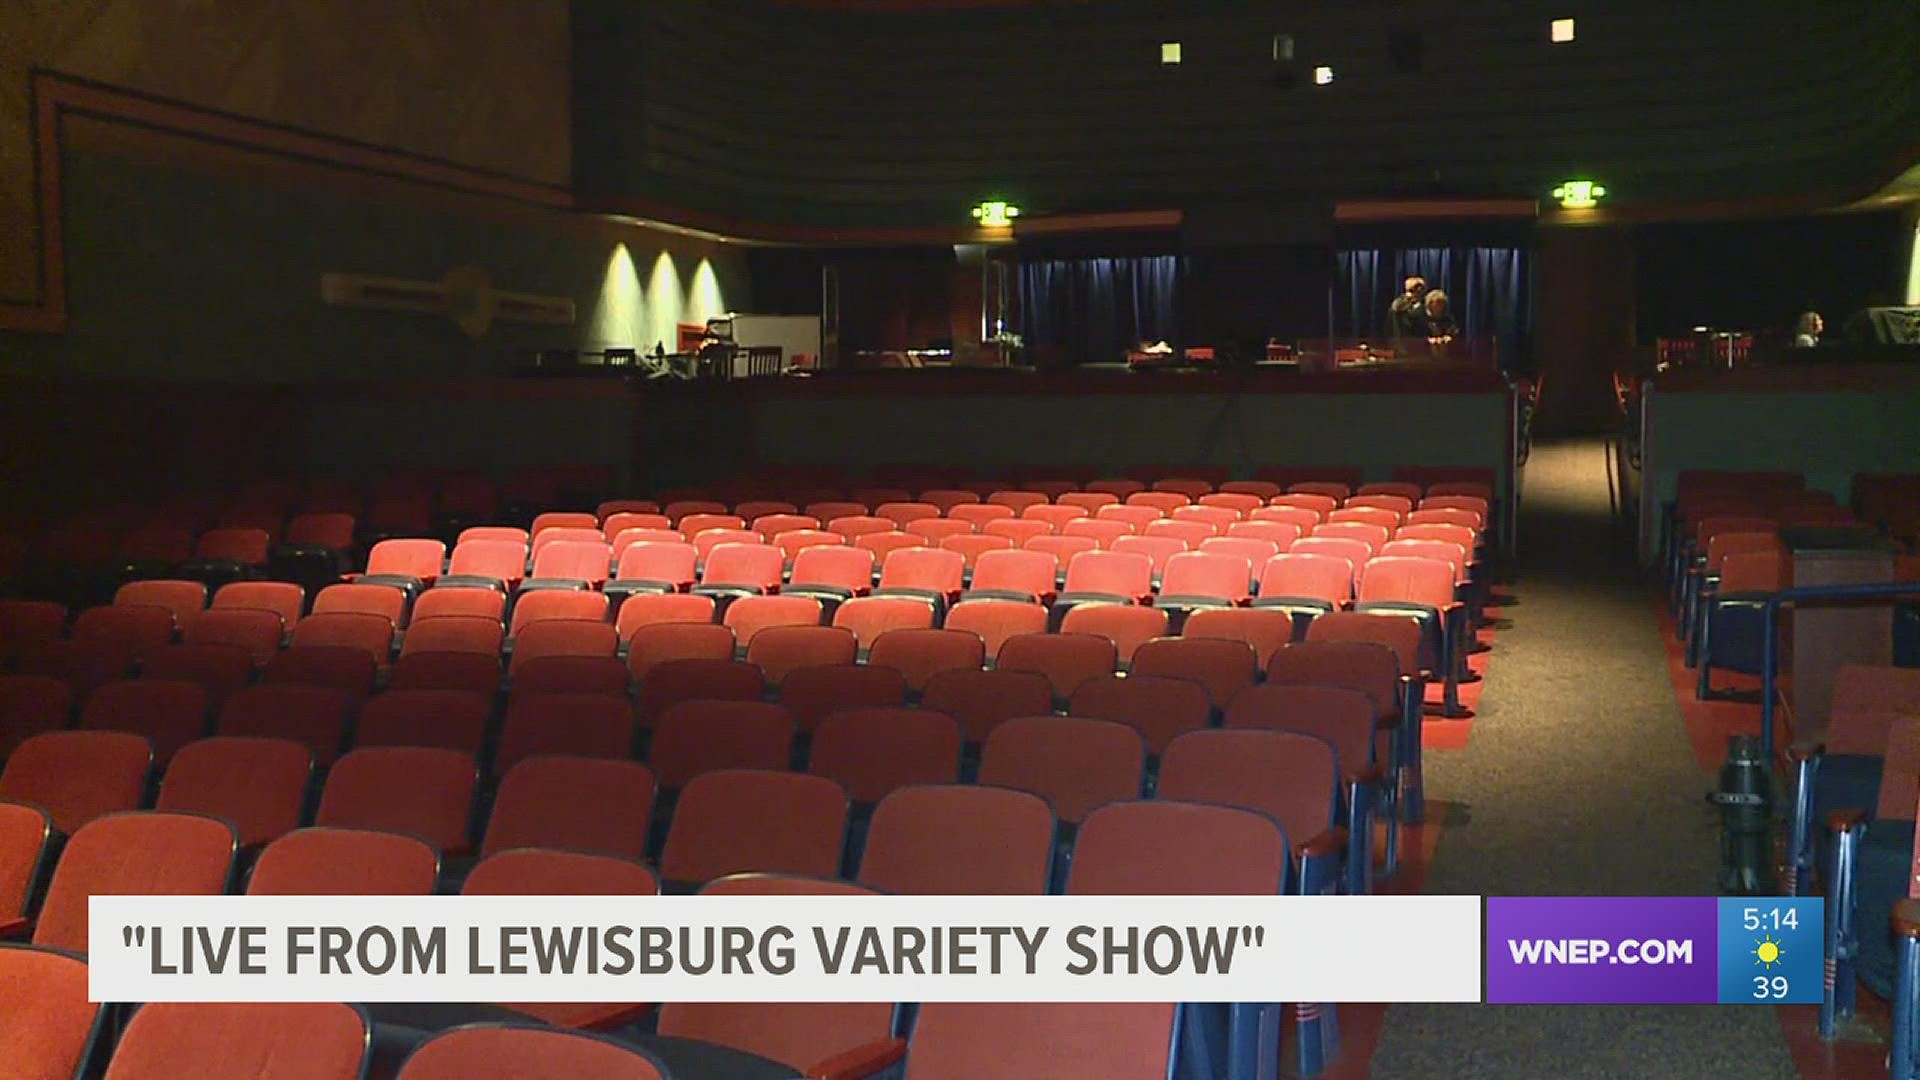 On Sunday the Campus Theatre in Lewisburg will host its first variety show.